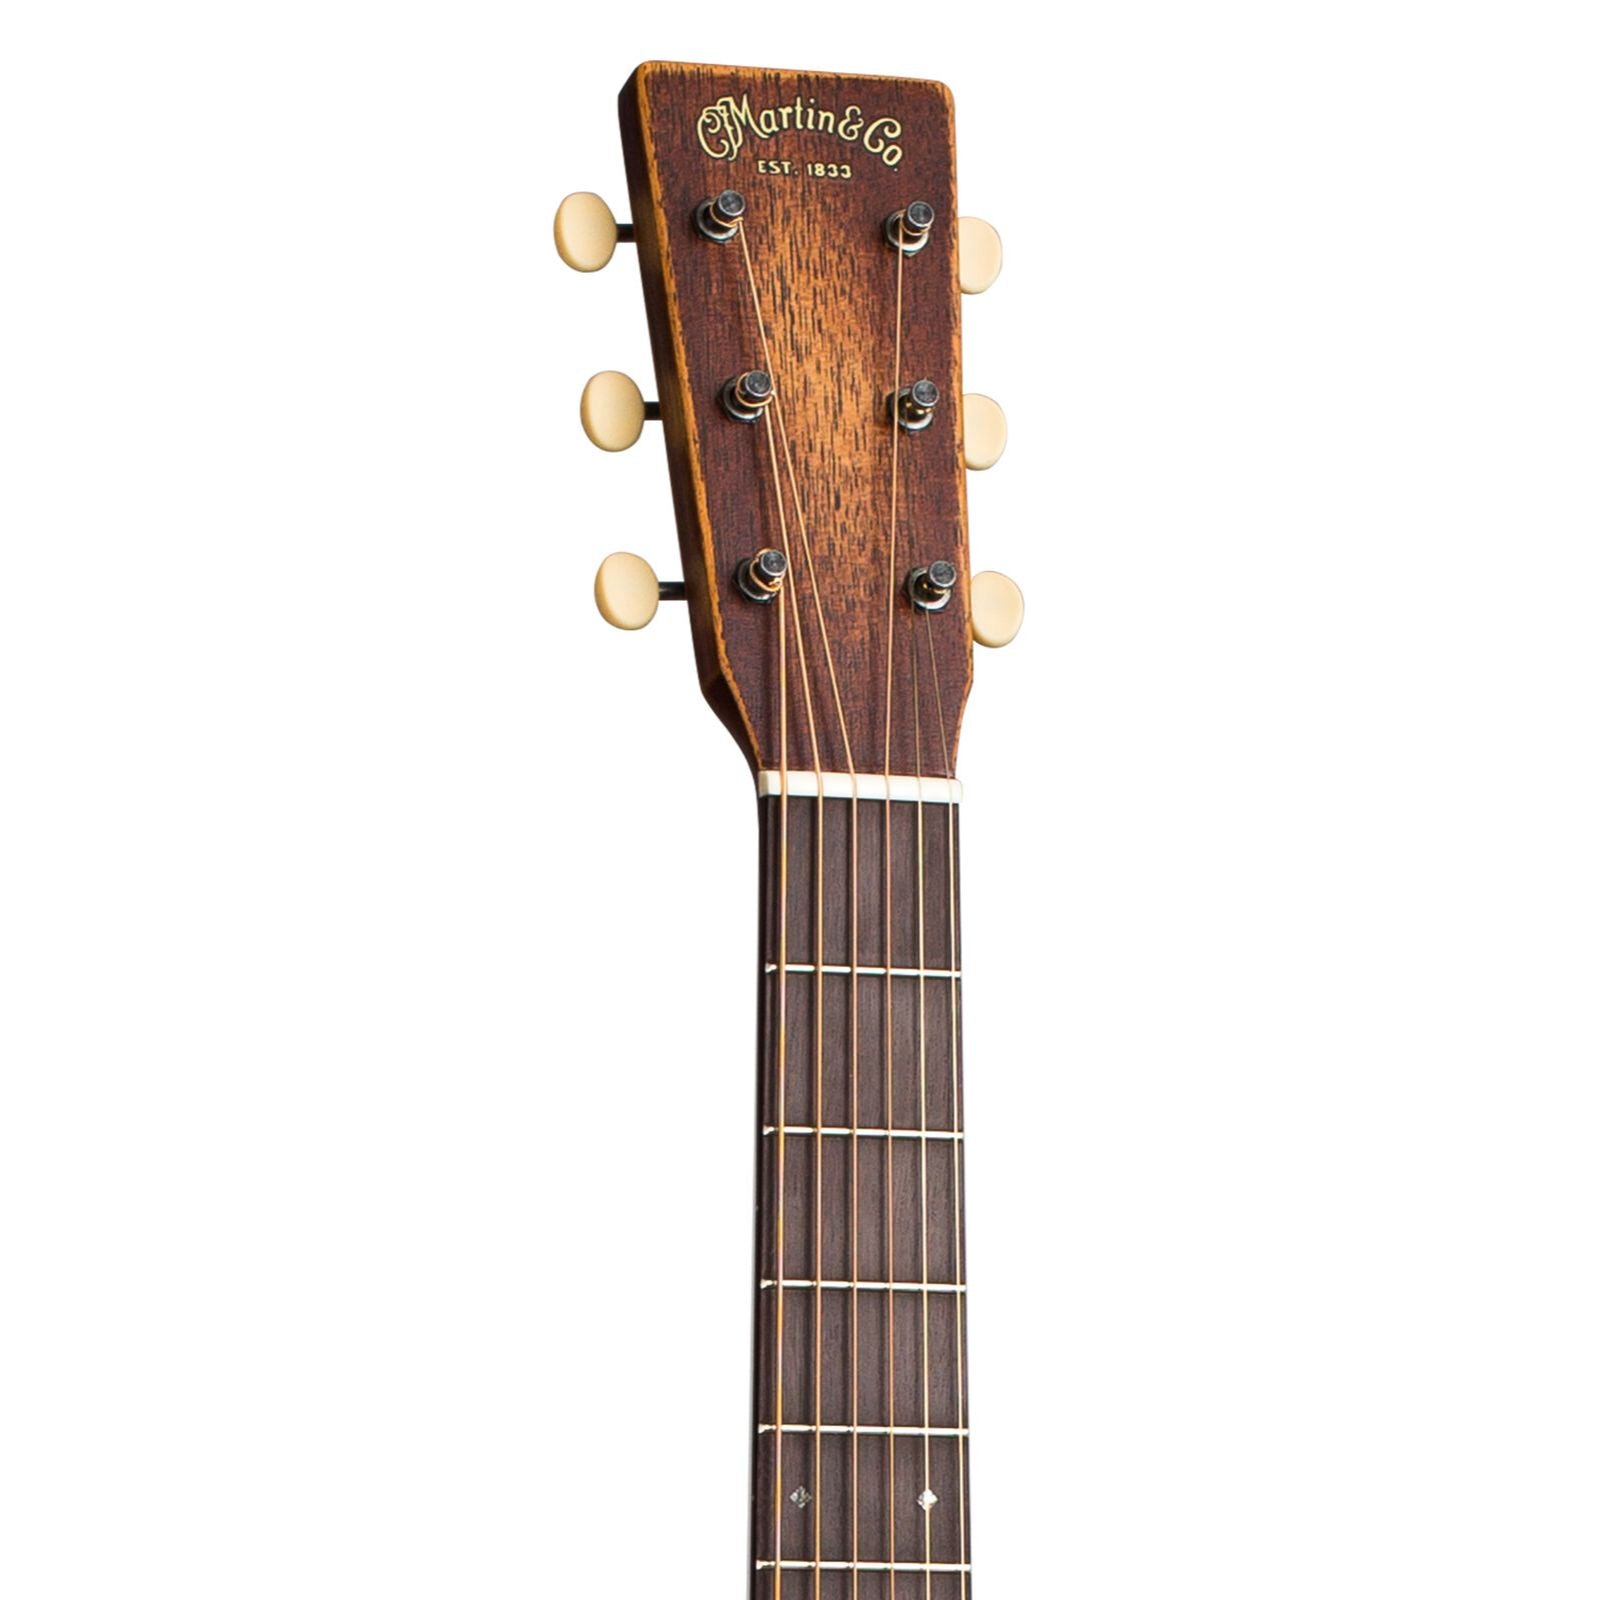 Martin D-15M StreetMaster® Acoustic Guitar